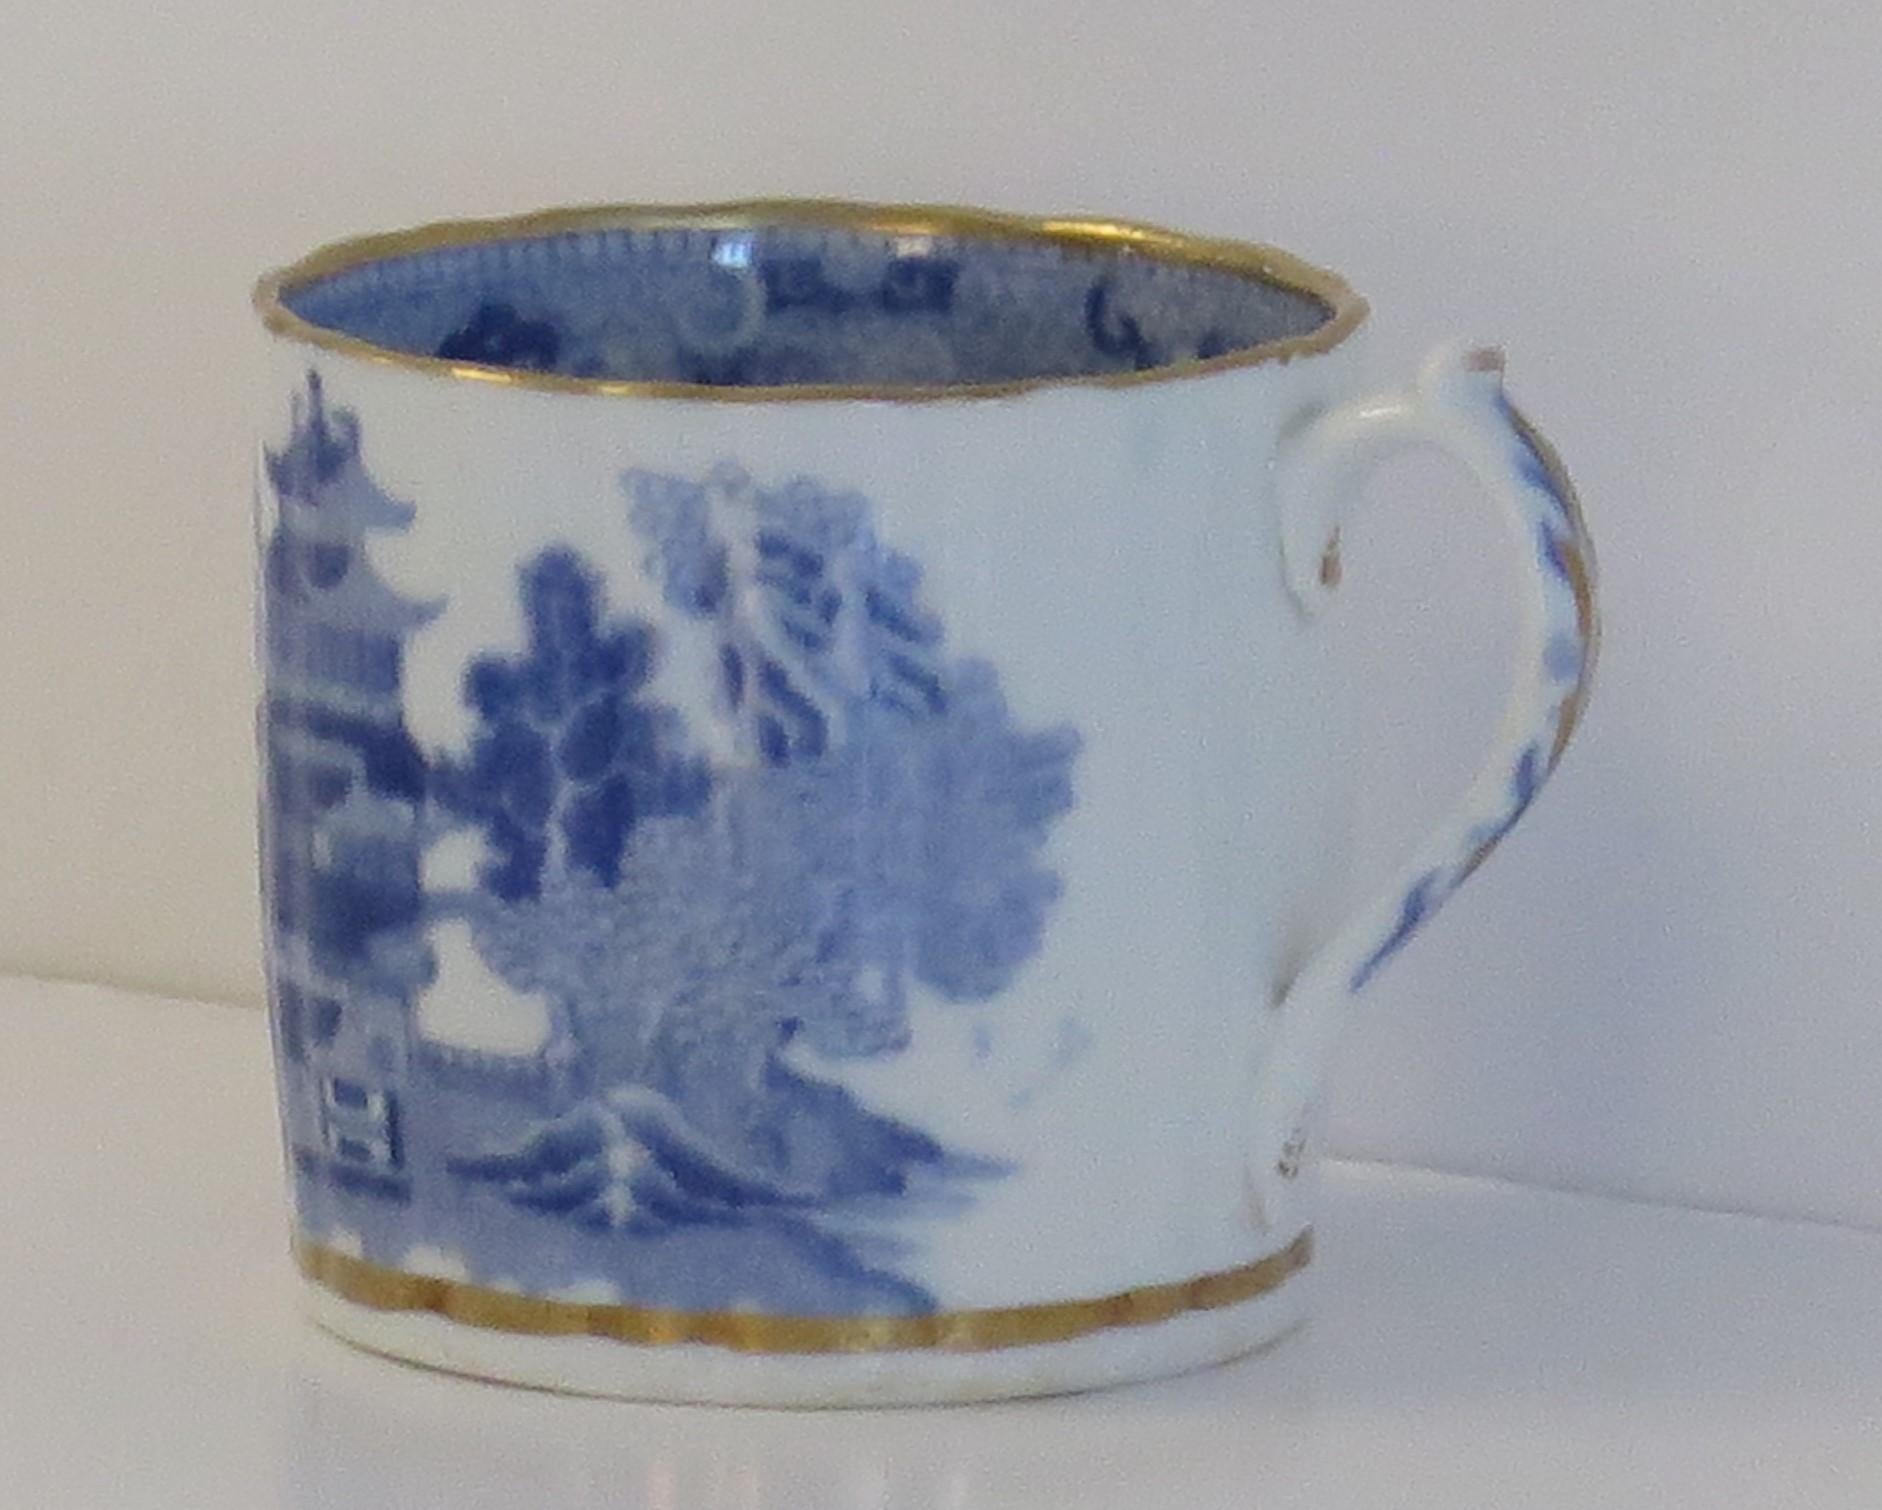 This is a porcelain blue and white, gilded Coffee Can made by Miles Mason (Mason's), Staffordshire Potteries, in the early 19th century George 111rd period, circa 1805-1810.

The piece is well potted with vertical flutes, a slightly wavy rim and